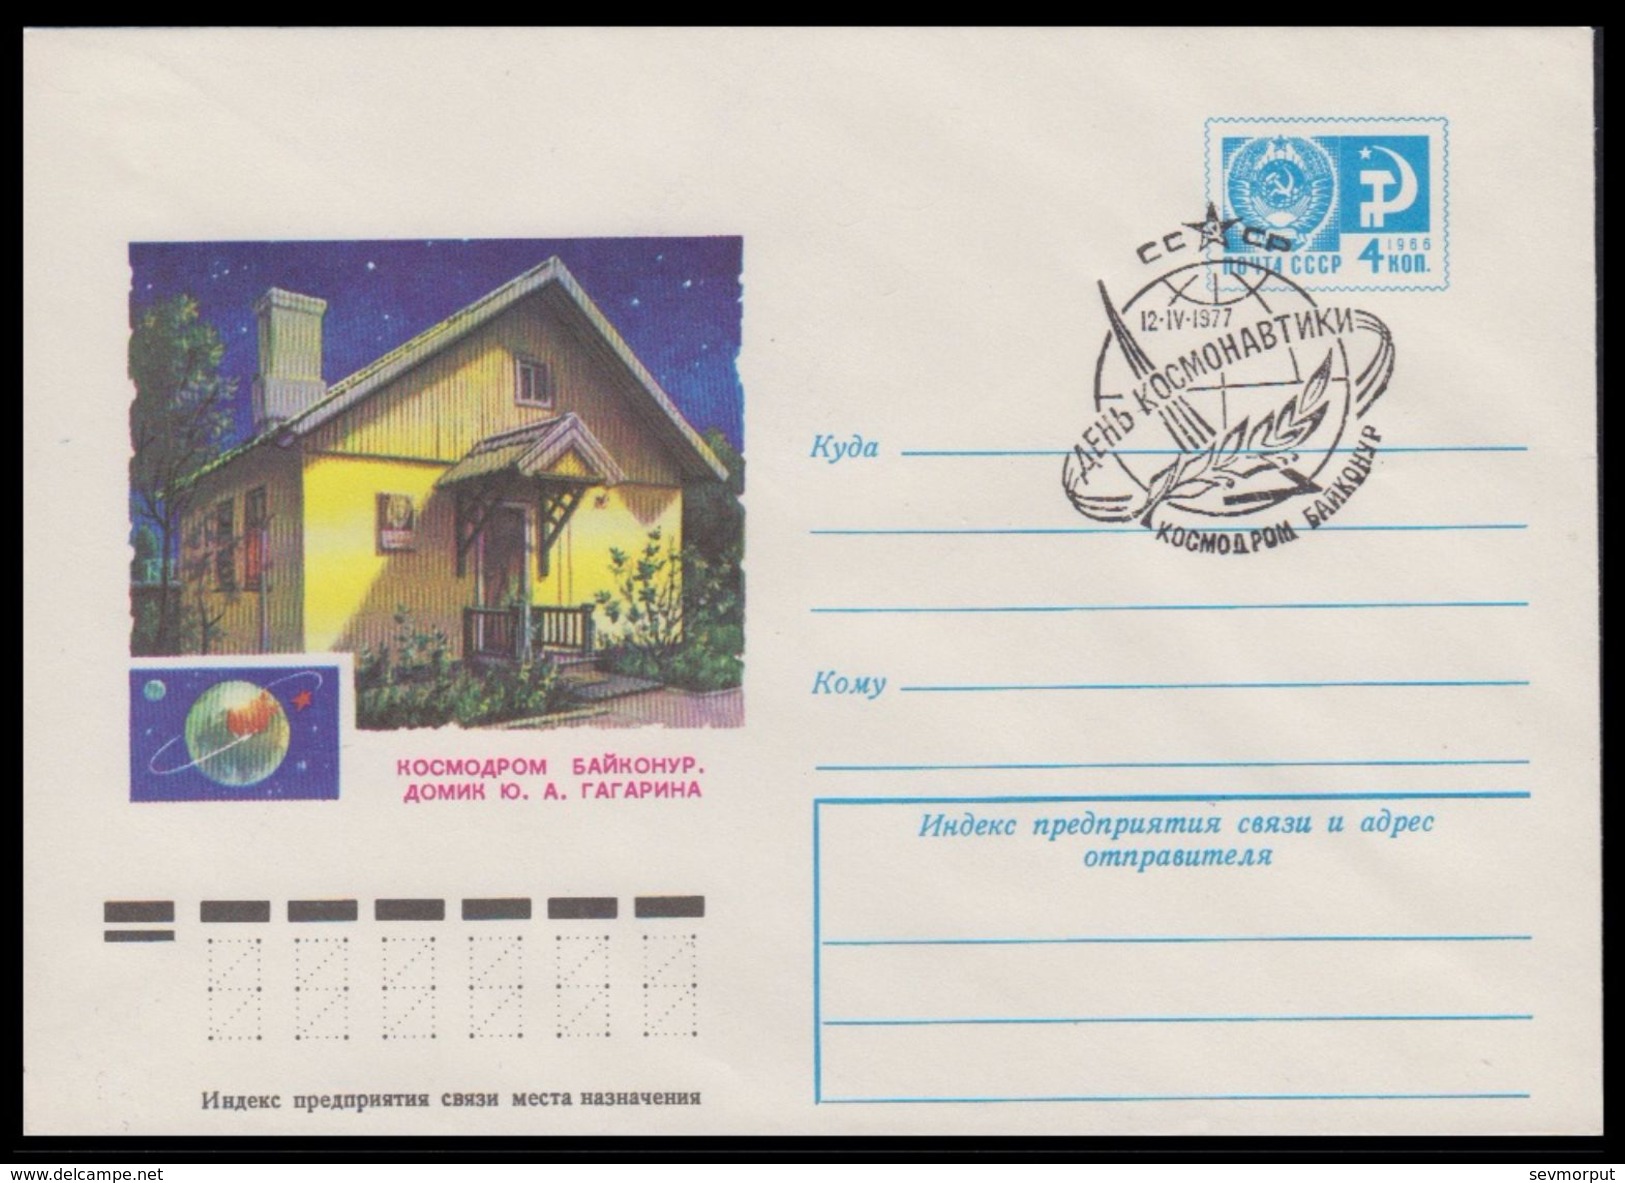 11215 RUSSIA 1976 ENTIER COVER Used GAGARIN HOUSE MUSEUM BAIKONUR COSMODROME KAZAKHSTAN SPACE ESPACE ASTRONOMY 76-188 - Russia & USSR